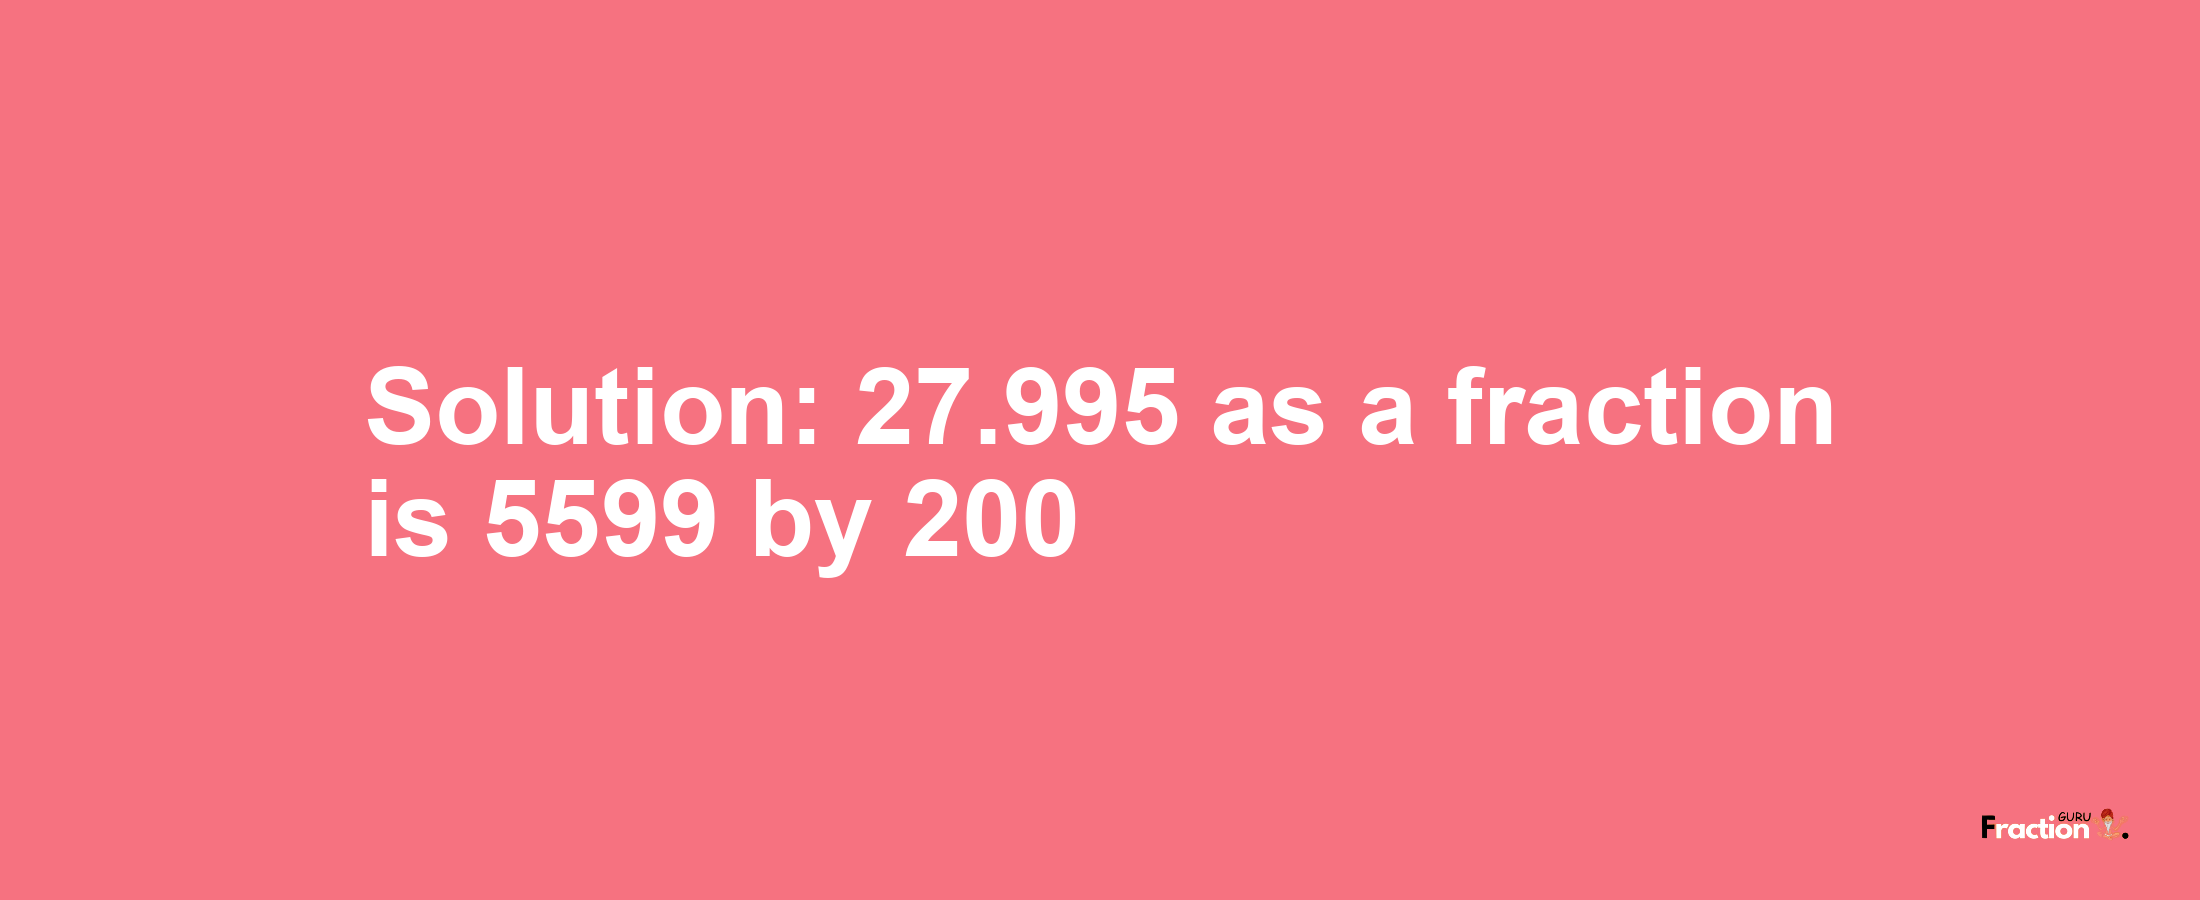 Solution:27.995 as a fraction is 5599/200